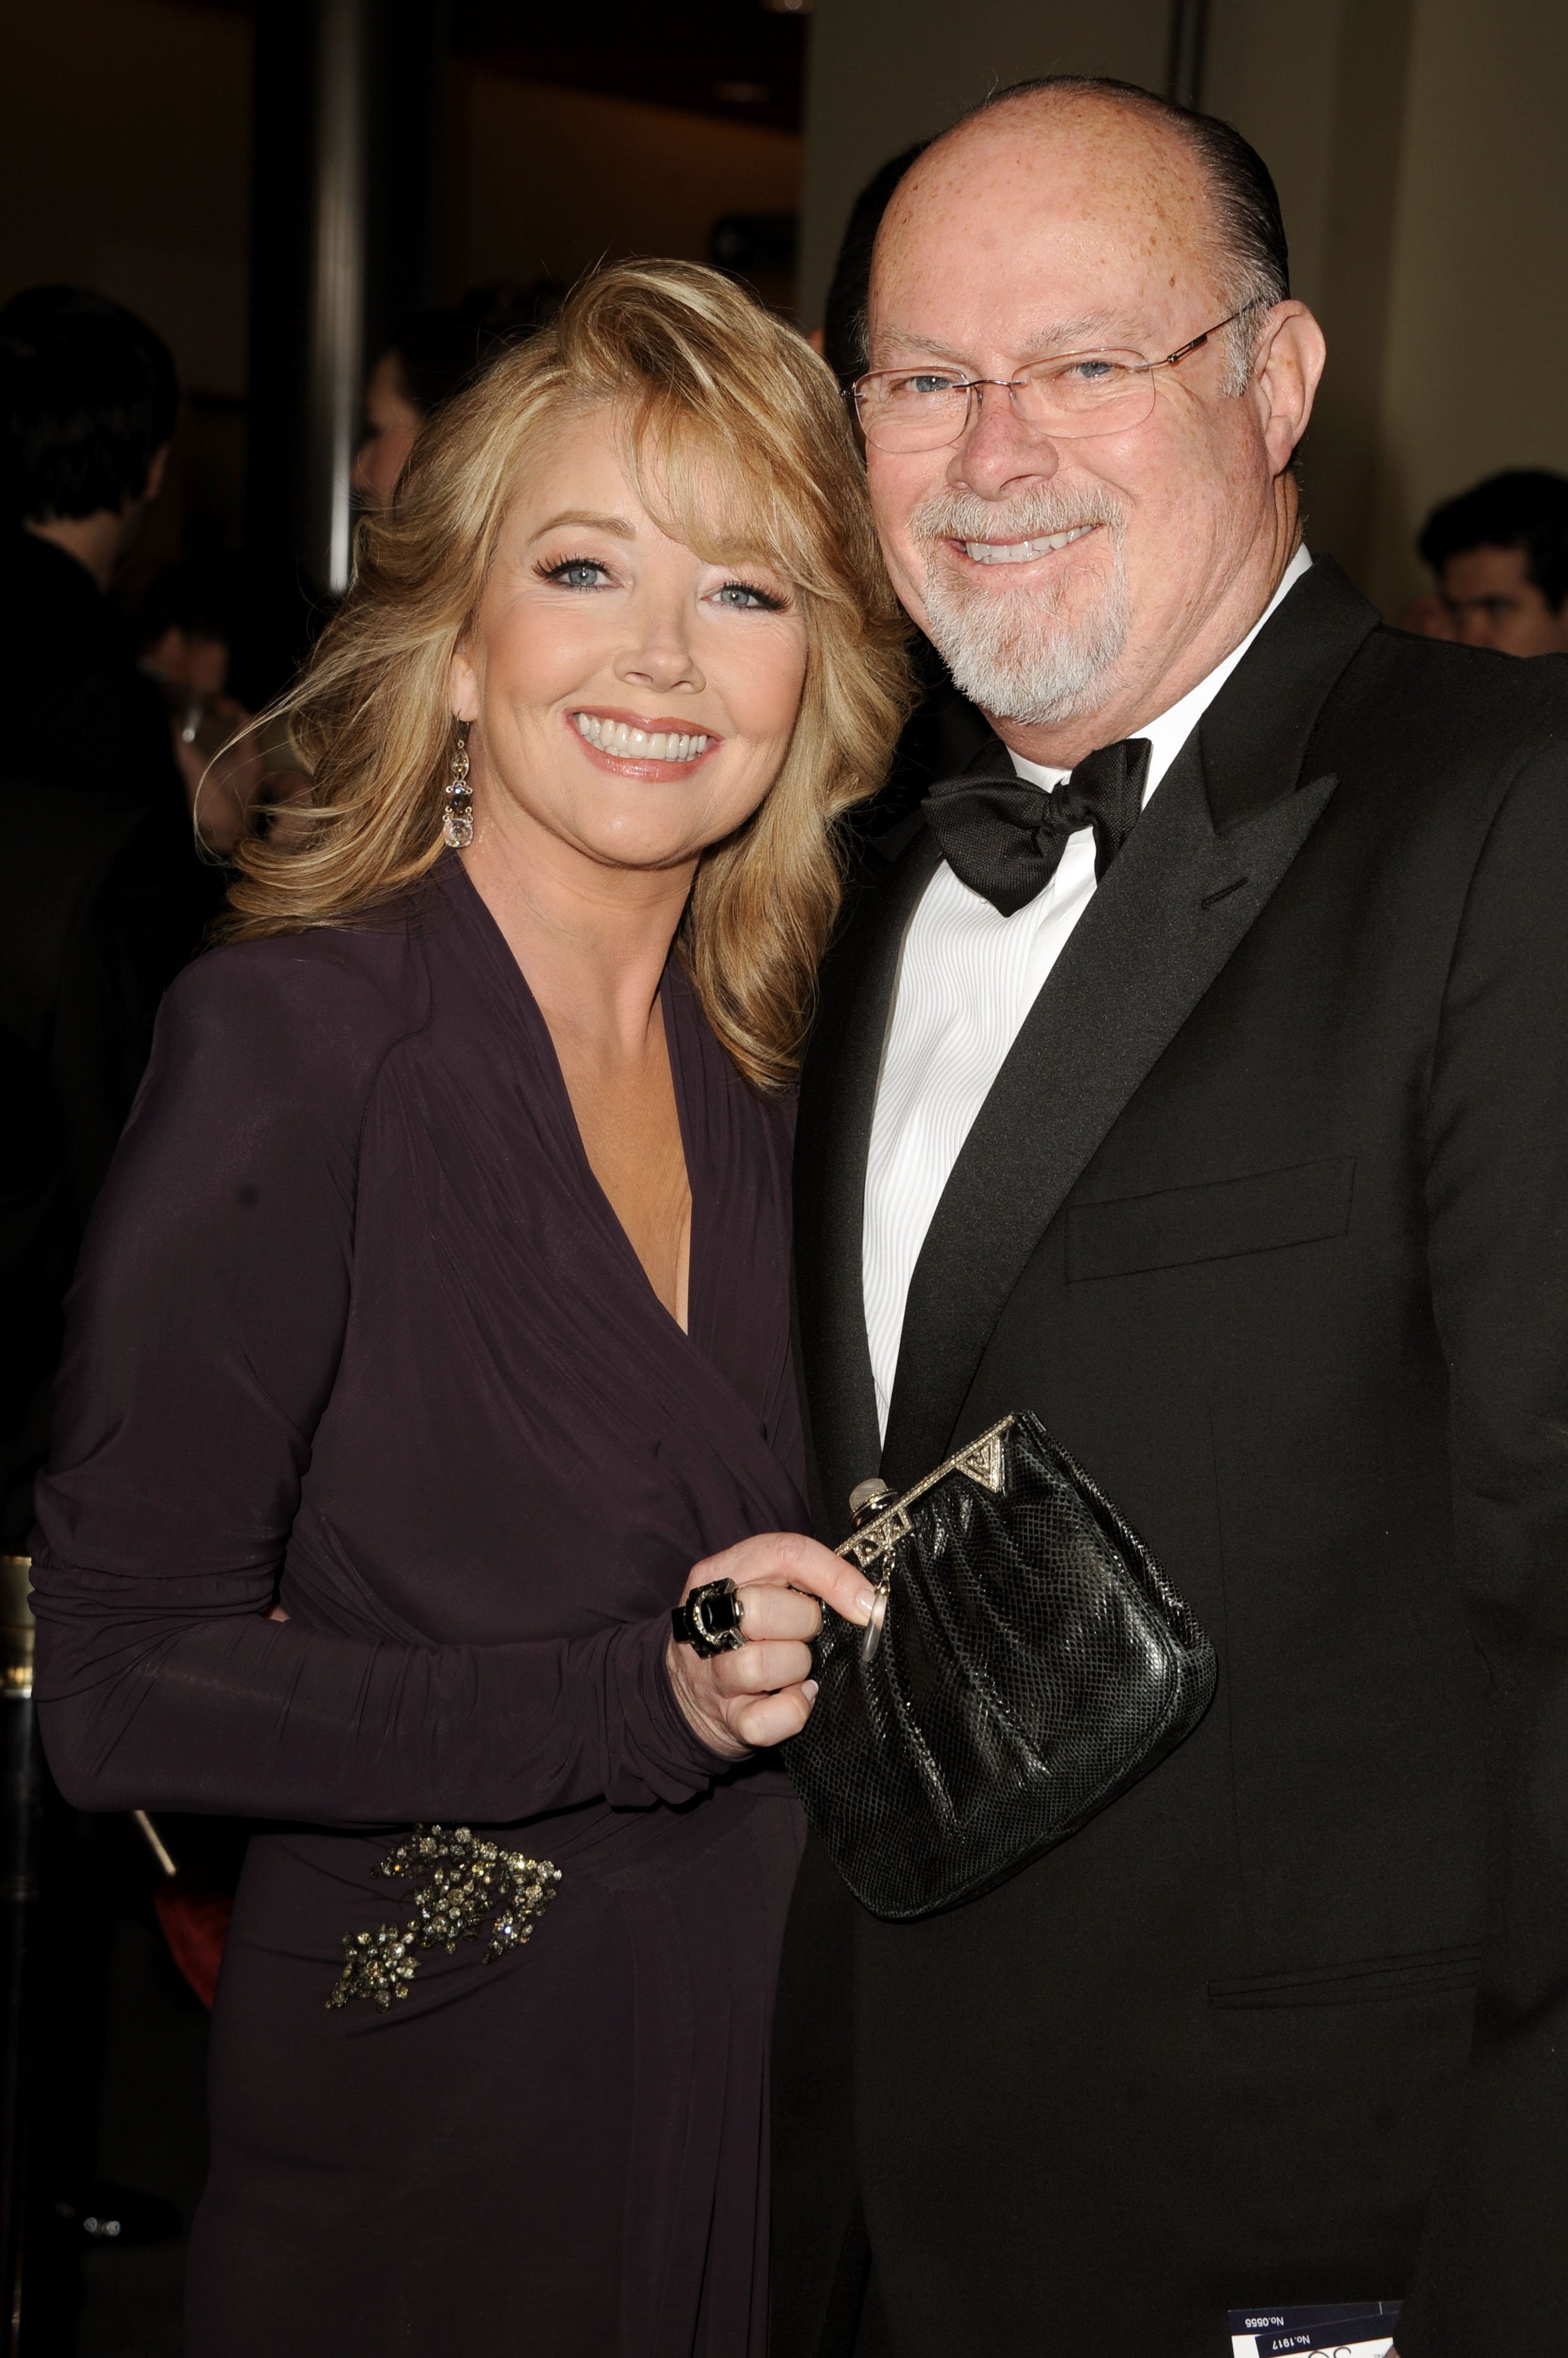 Actress Melody Thomas Scott with her husband Edward James Scott at the 63rd Annual Directors Guild of America Awards in Hollywood California on January 29, 2011. | Source: Steve Granitz/Getty Images